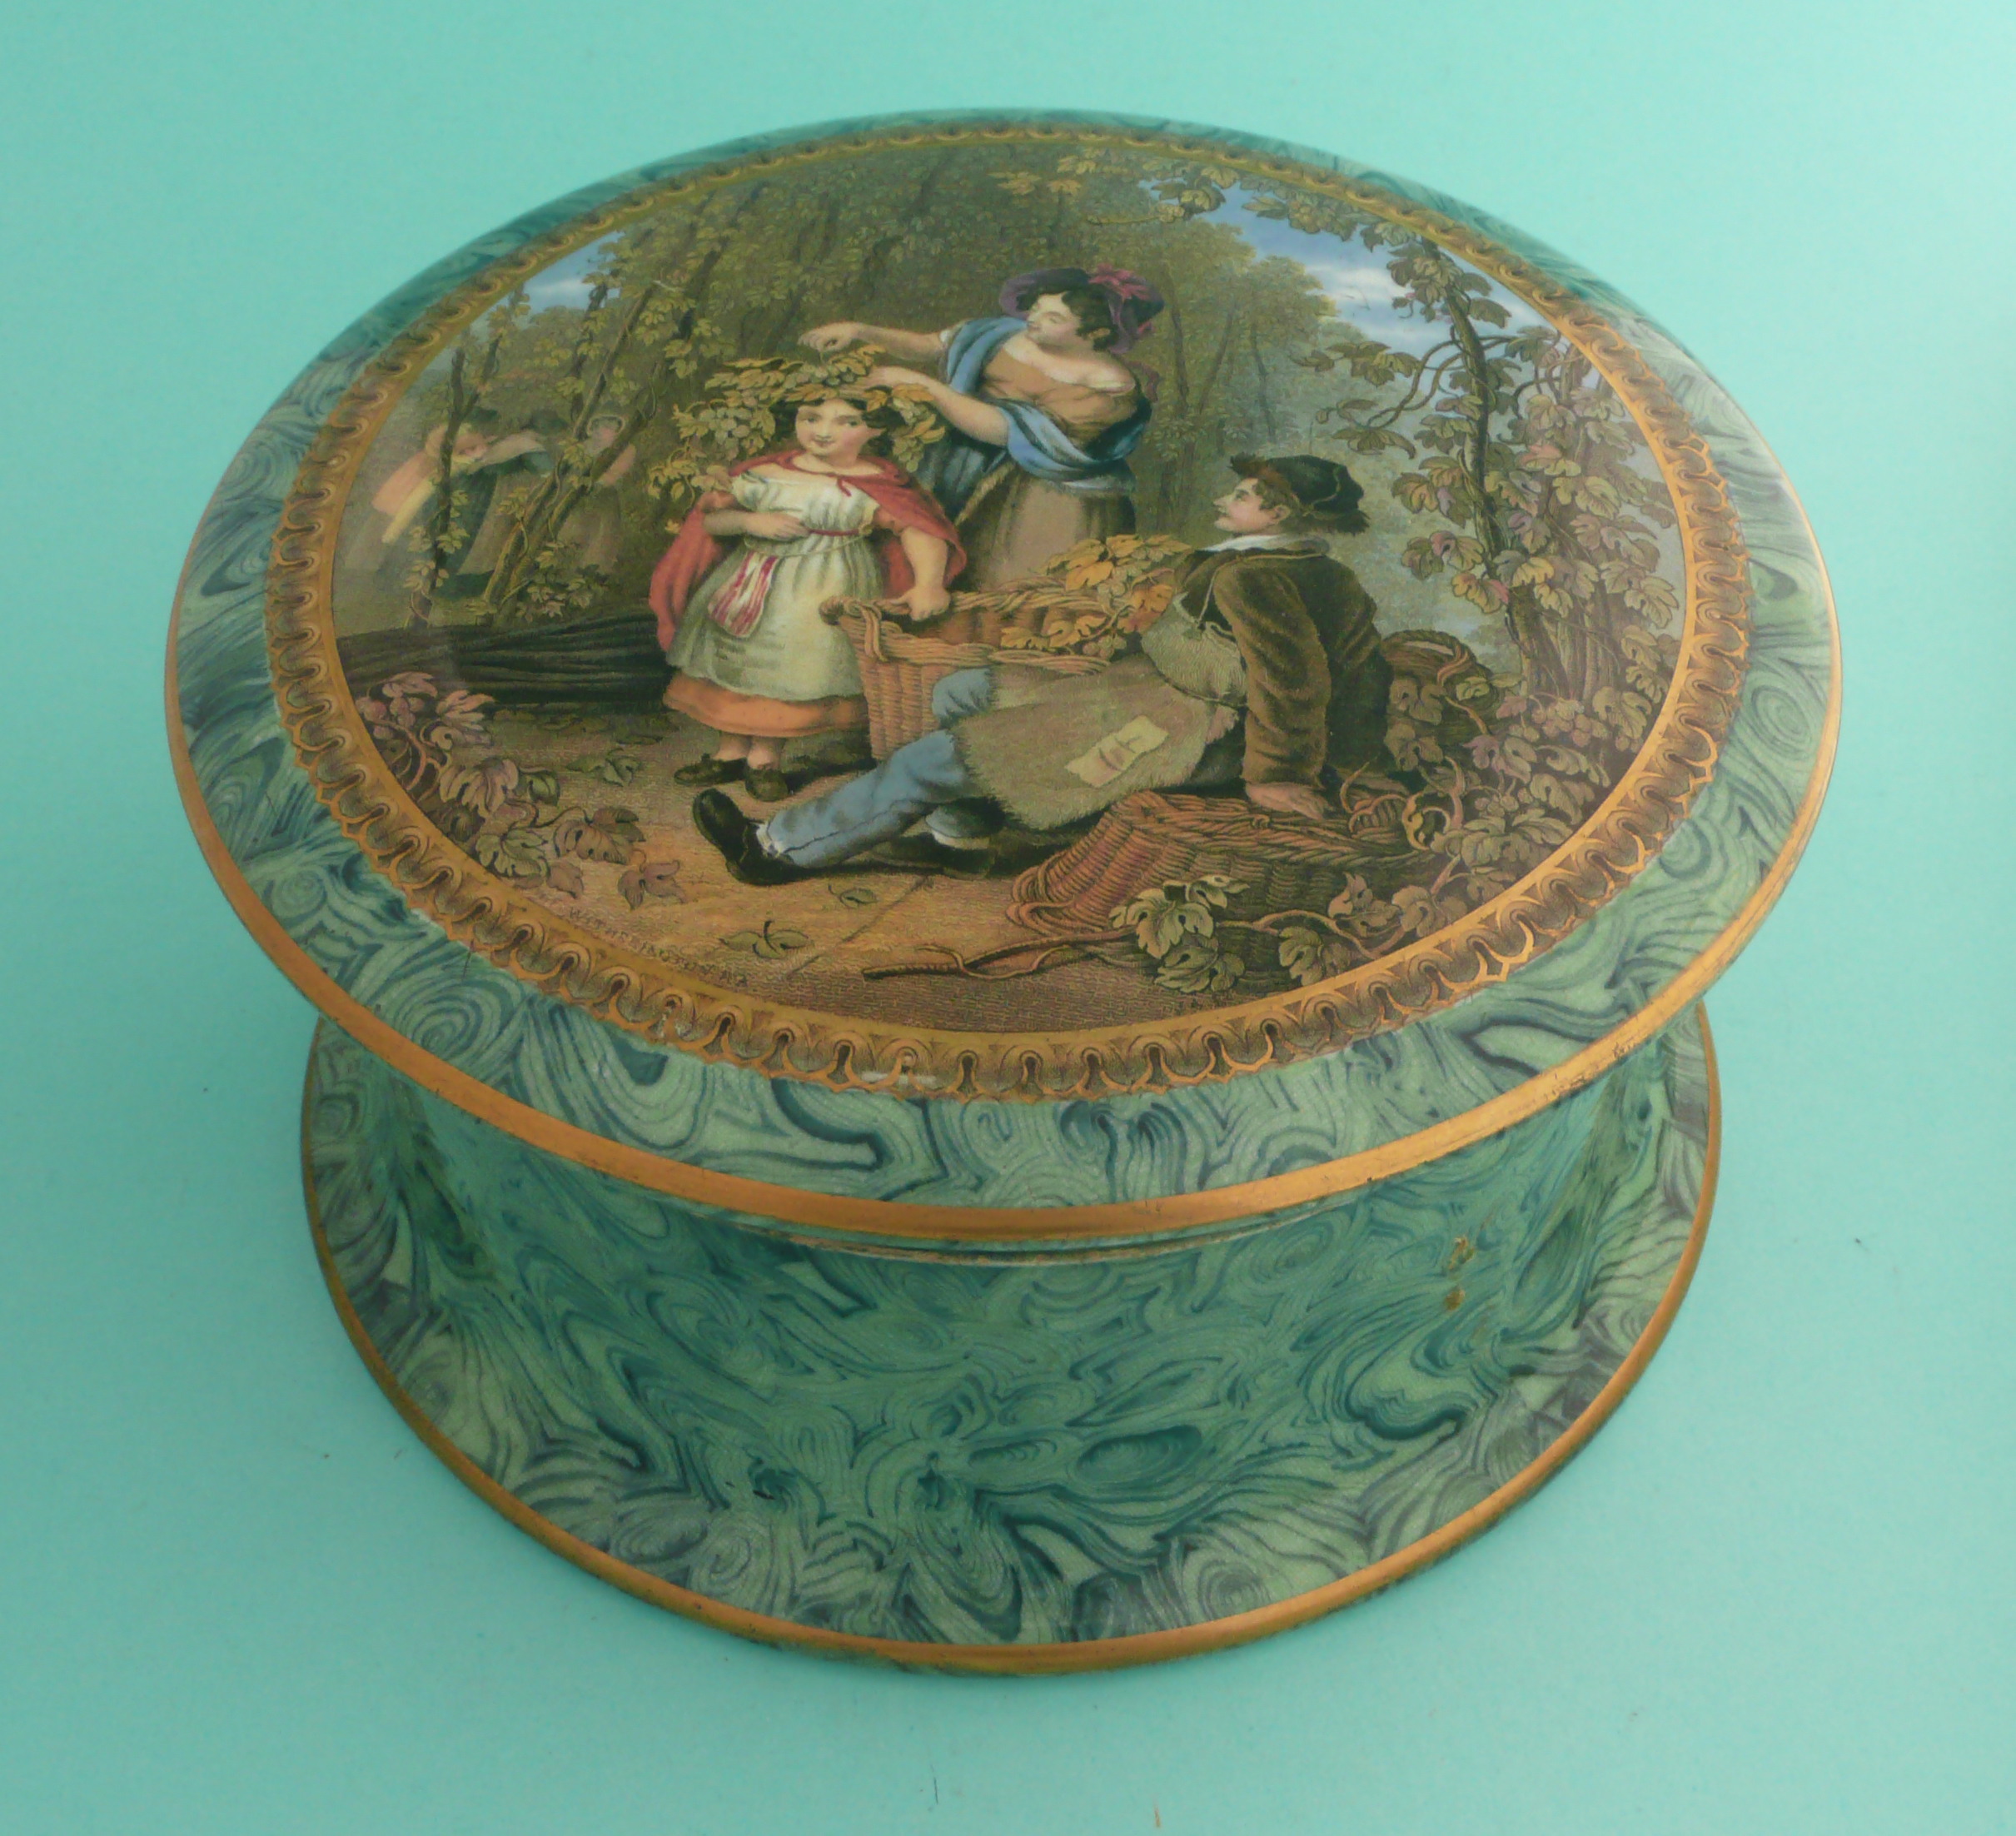 The Hop Queen (414) extra large with malachite border and flange, gilt decoration, complete with